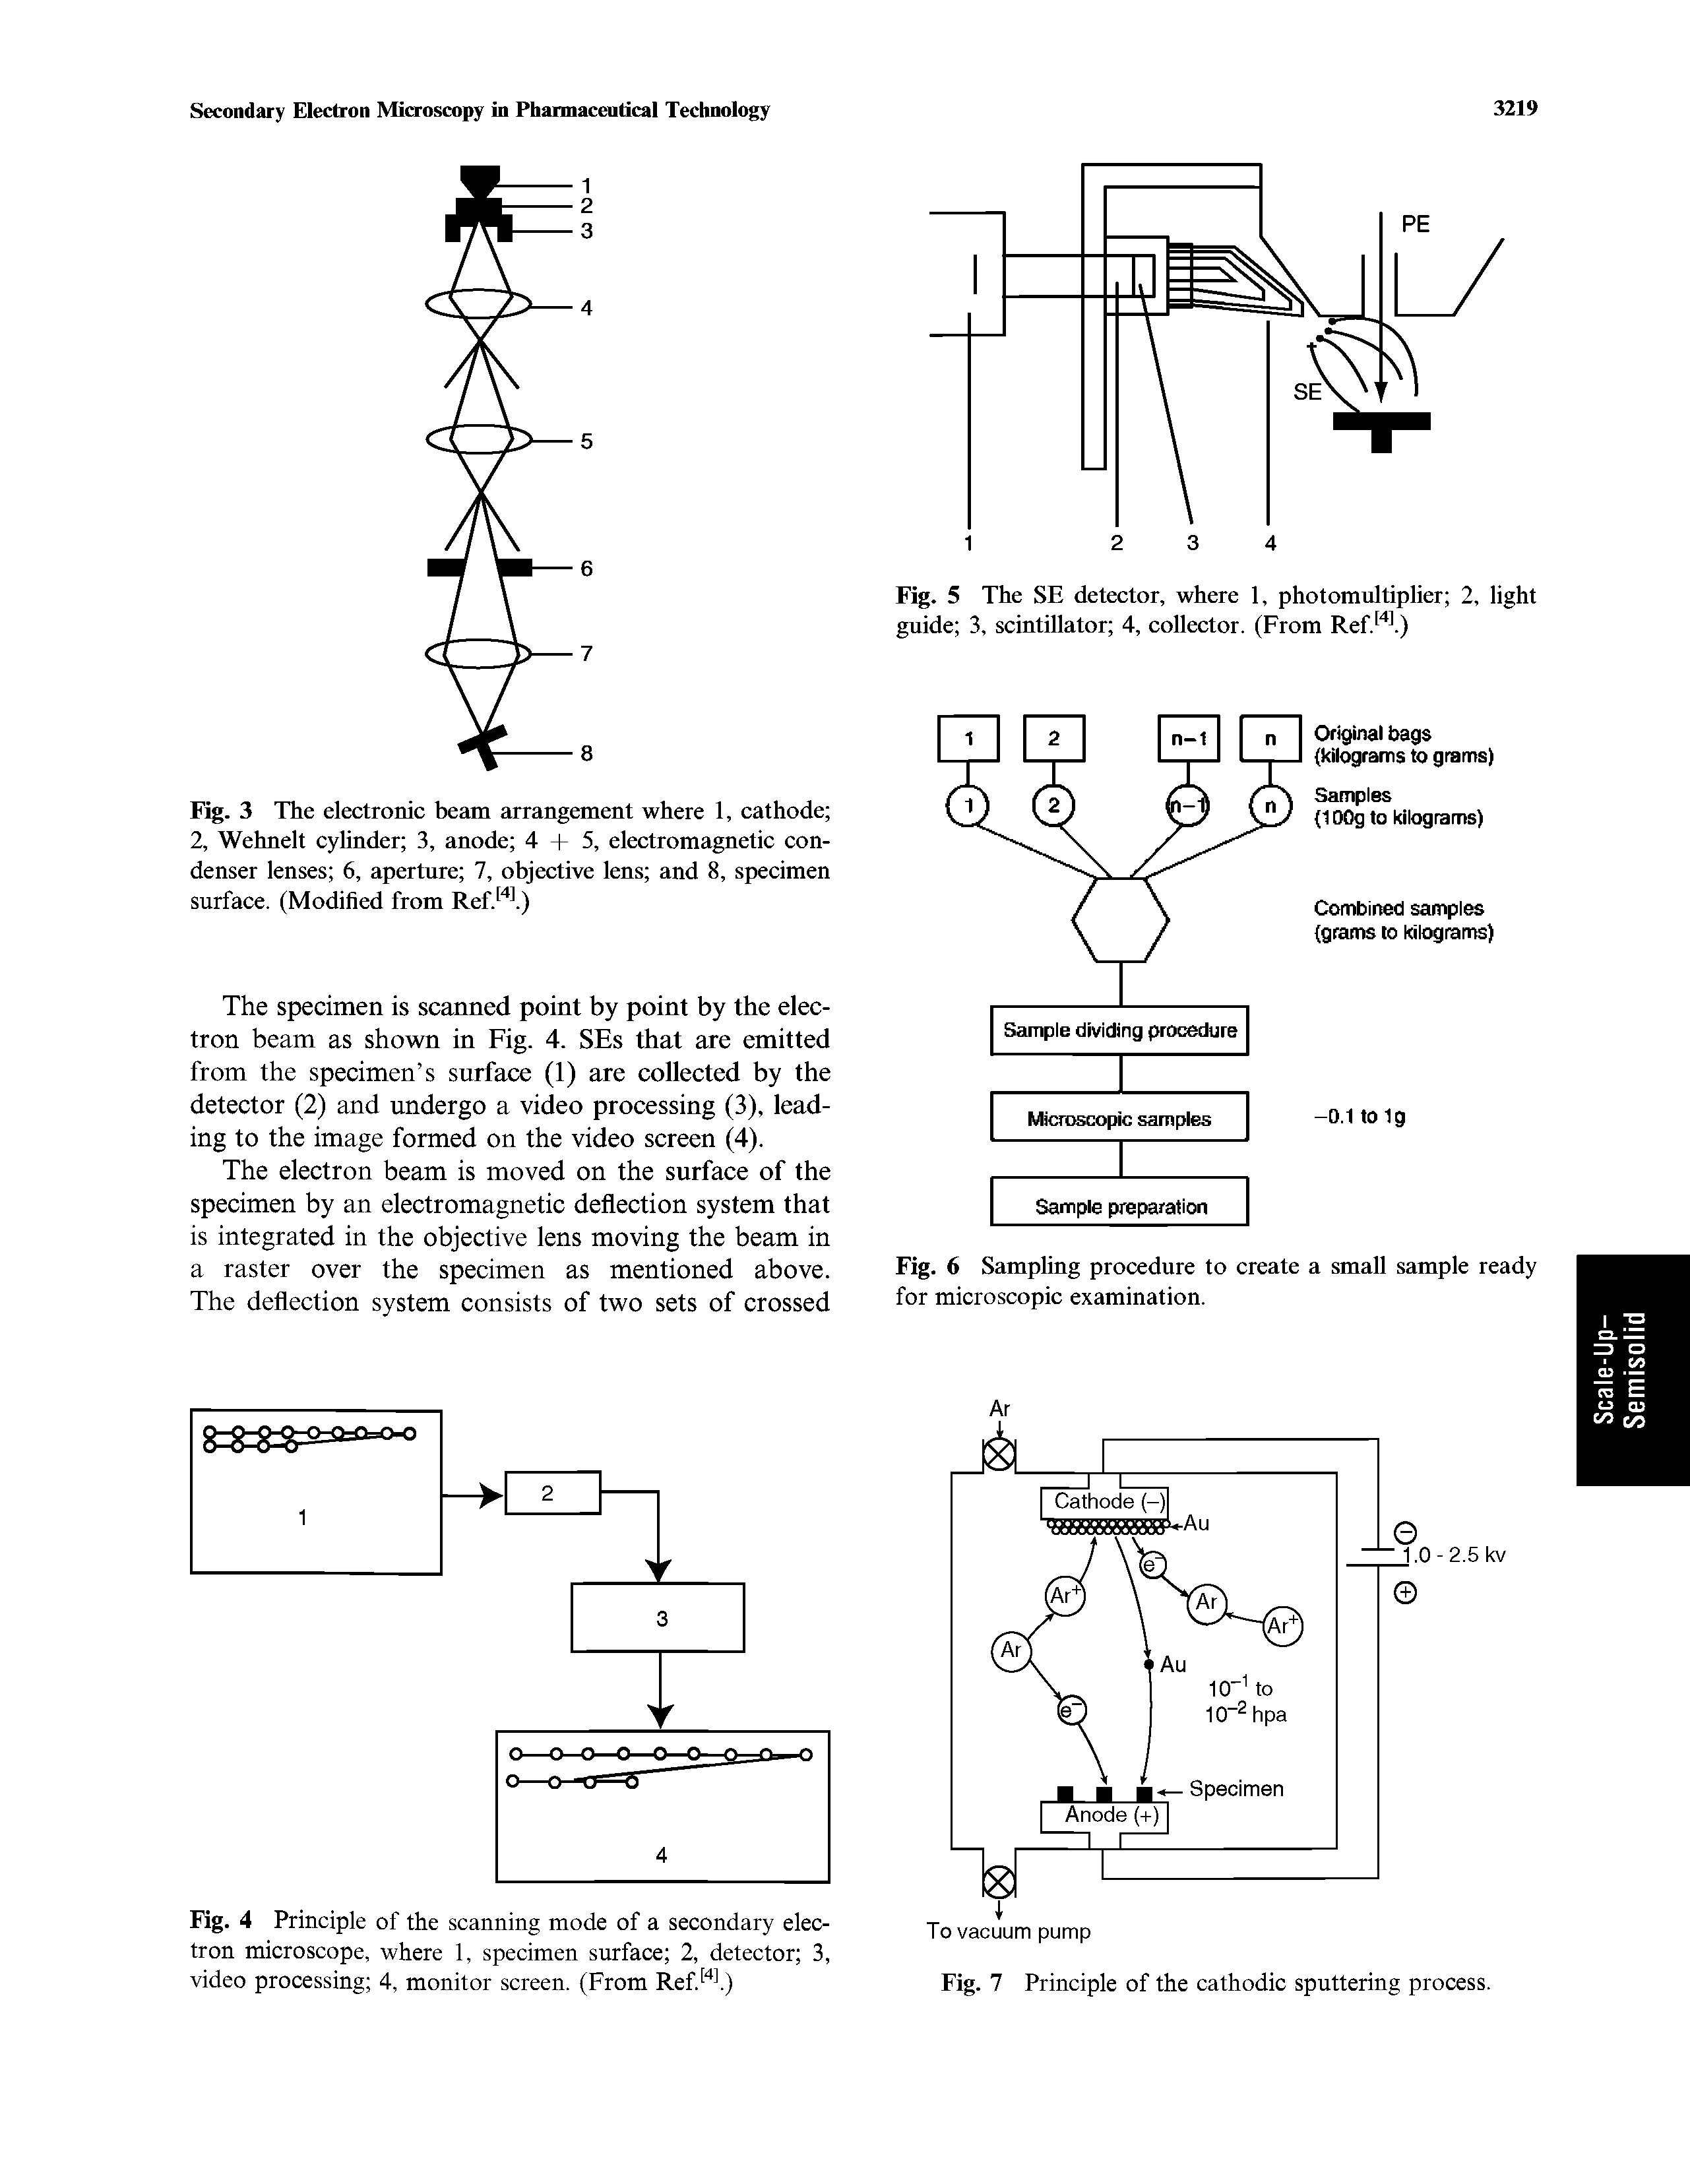 Fig. 4 Principle of the scanning mode of a secondary electron microscope, where 1, specimen surface 2, detector 3, video processing 4, monitor screen. (From Ref 1)...